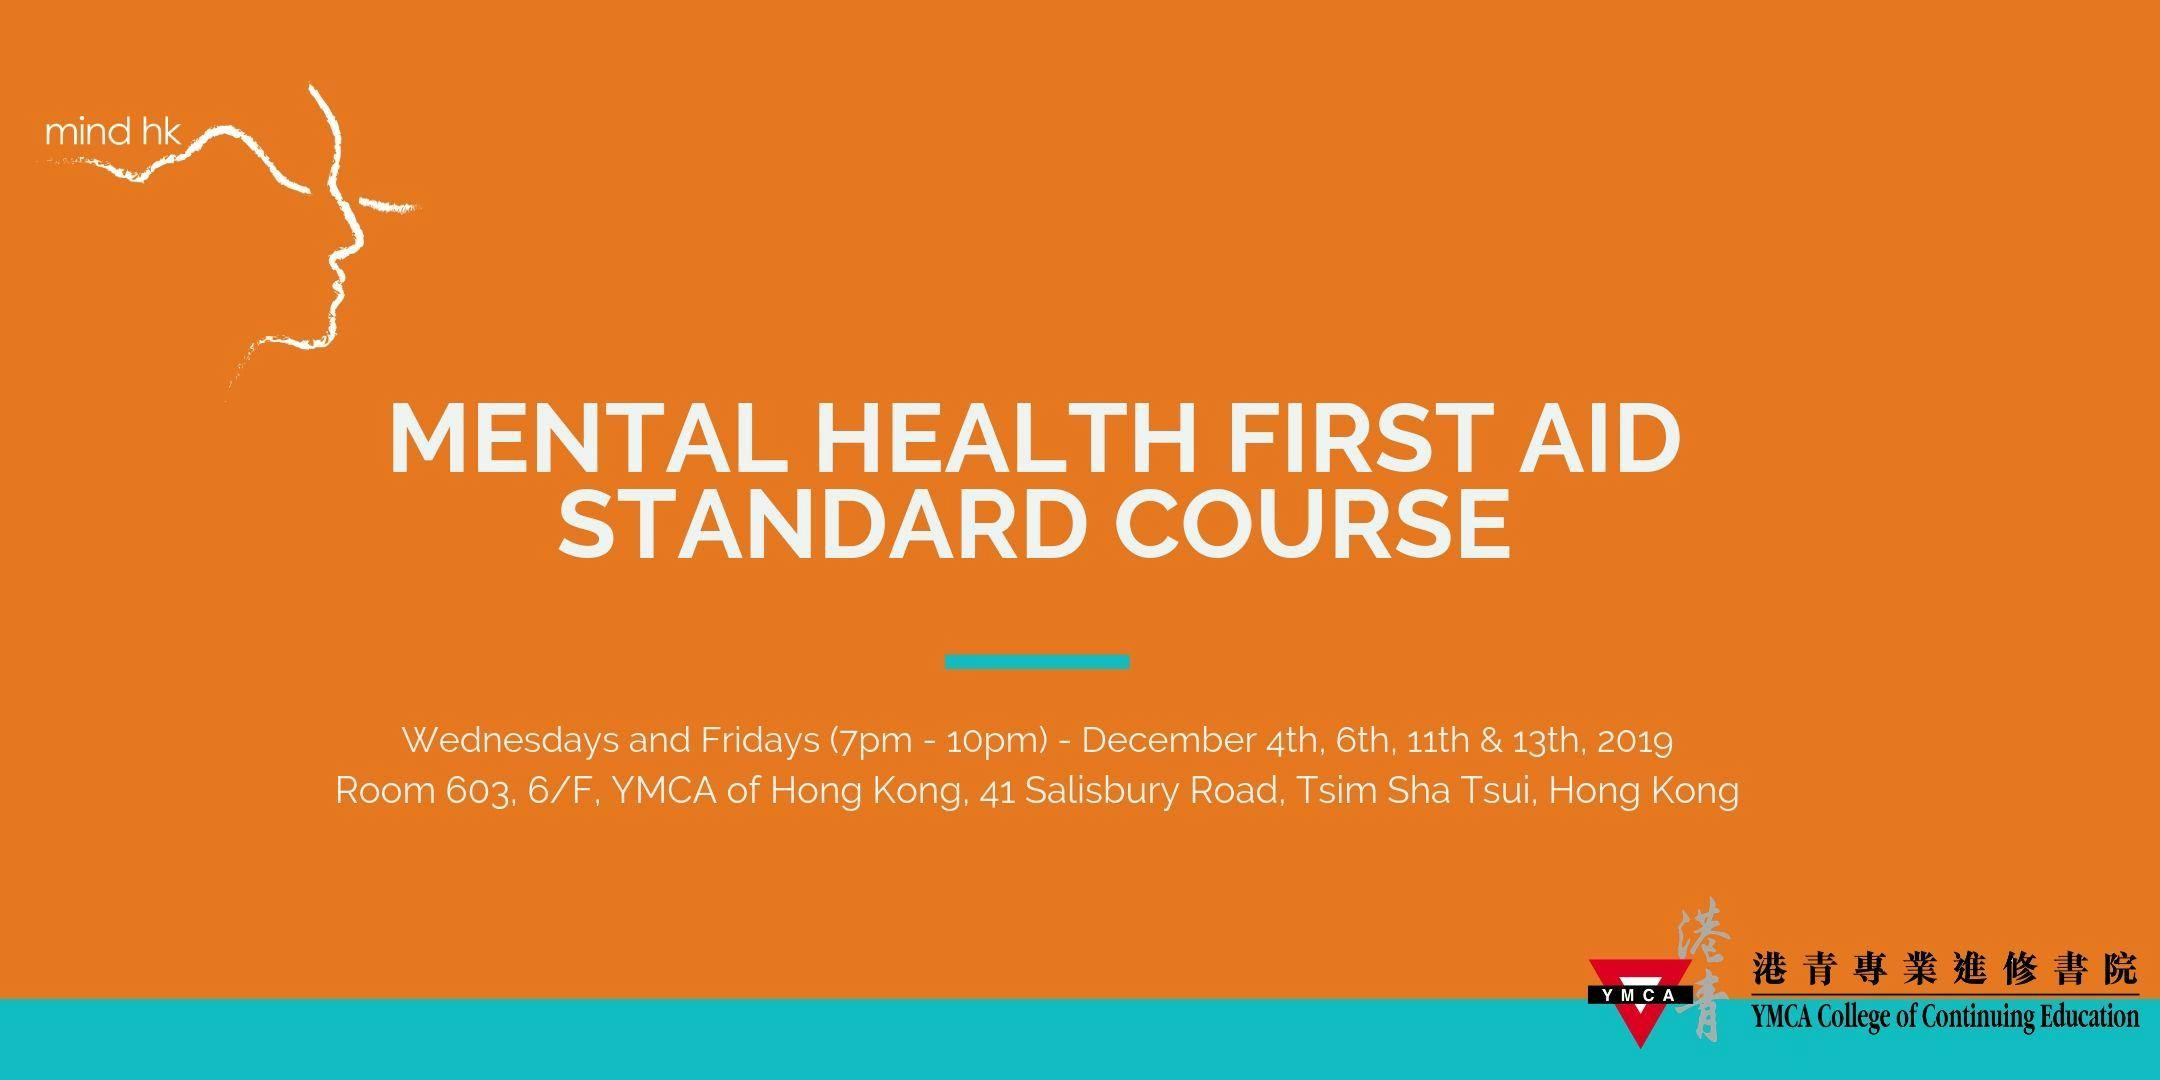 Mental Health First Aid Standard Course Dec (12 hours over 4-days): Dec 4, 6, 11, 13